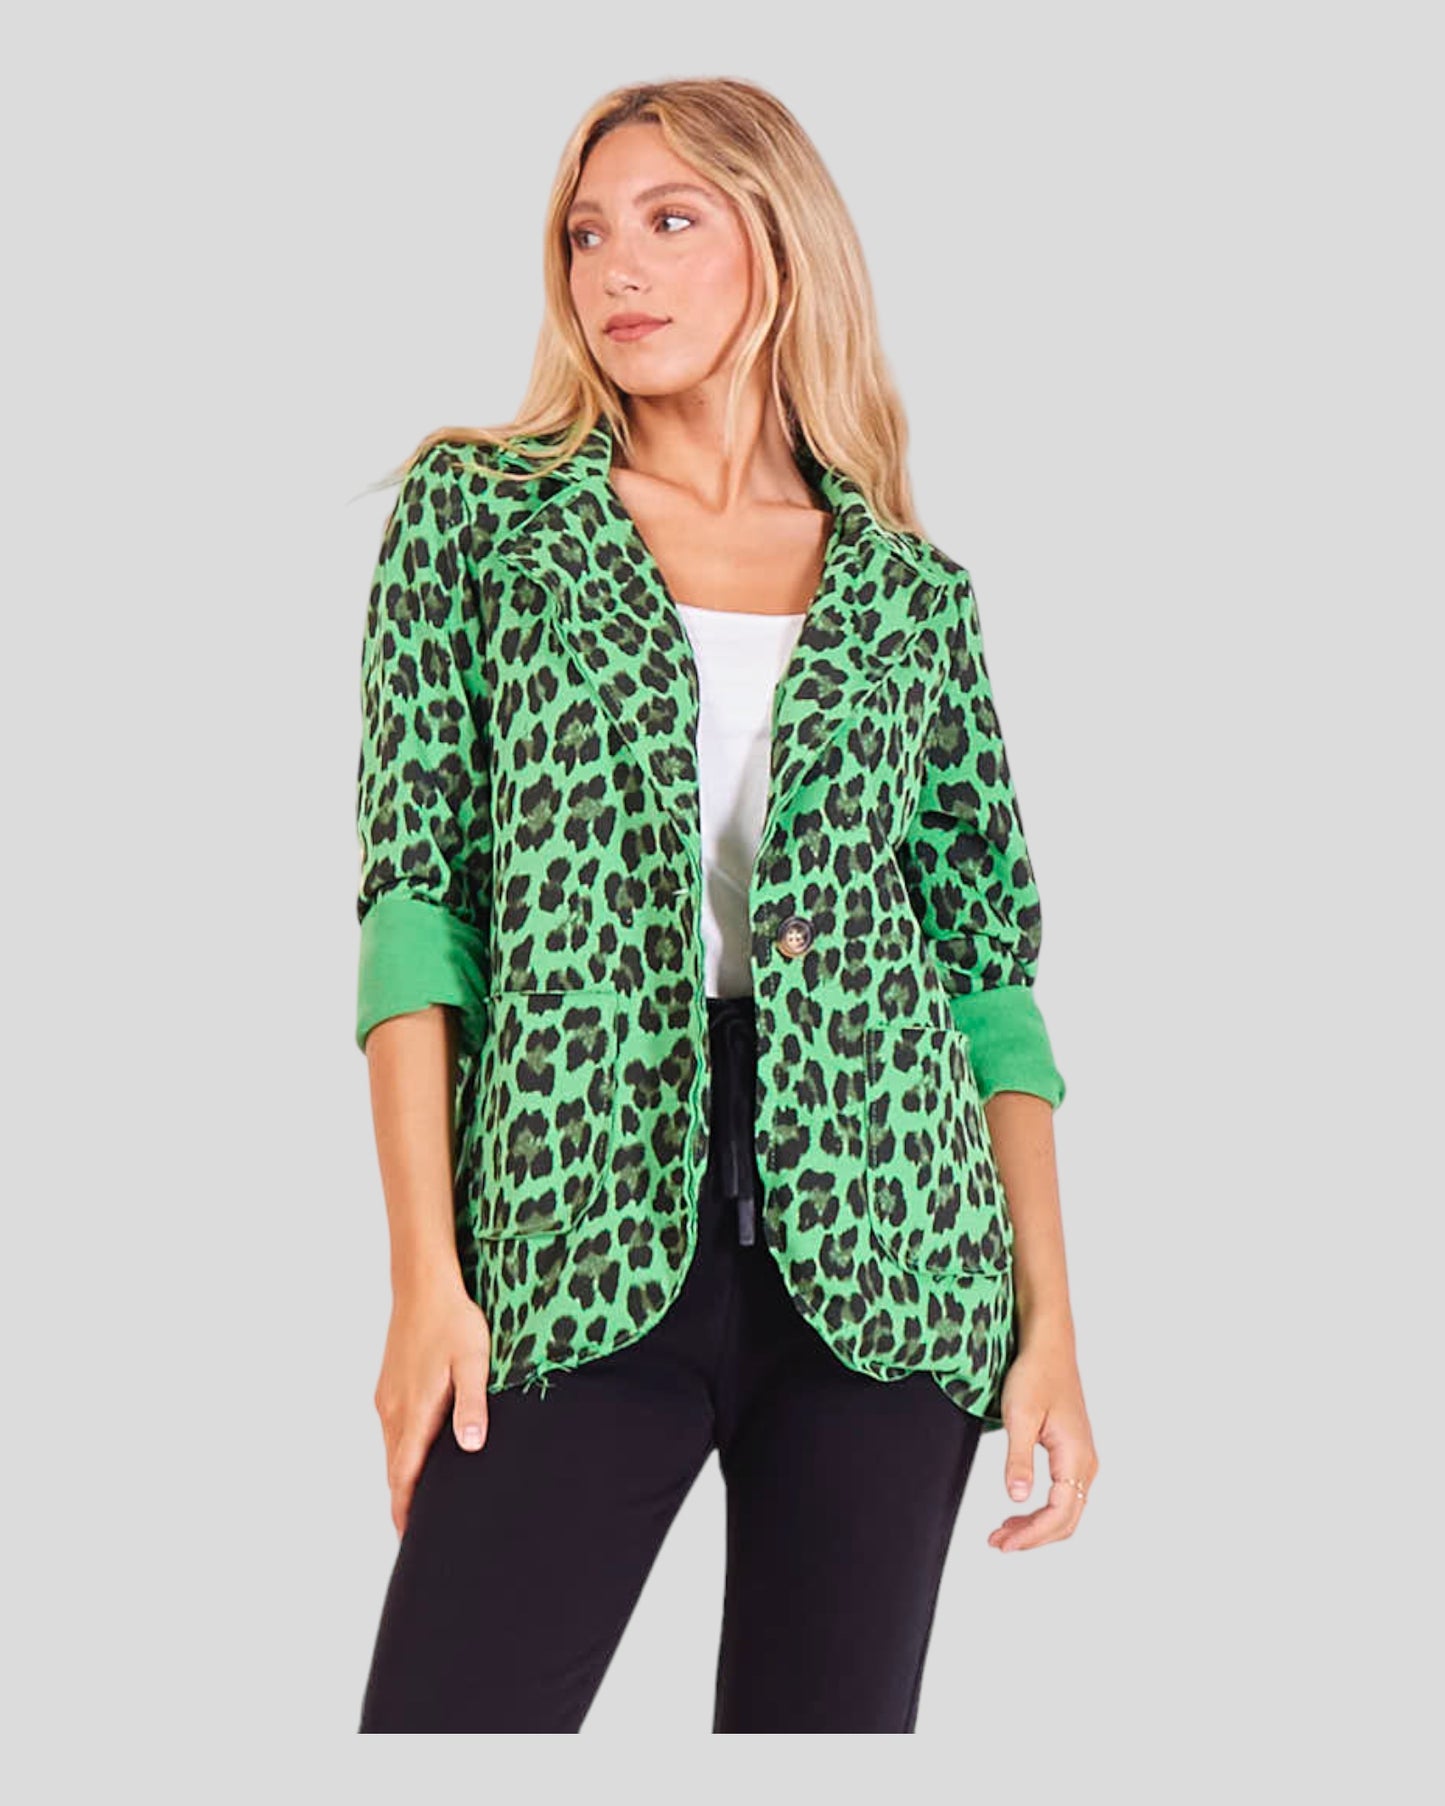 Animal Print Blazer crafted from lightweight cotton, offering both comfort and elegance. The blazer features a unique animal print design, making a bold and stylish statement. With a practical one-button closure, it effortlessly combines comfort with sophisticated flair. Two large front pockets enhance functionality while adding to the overall chic aesthetic.